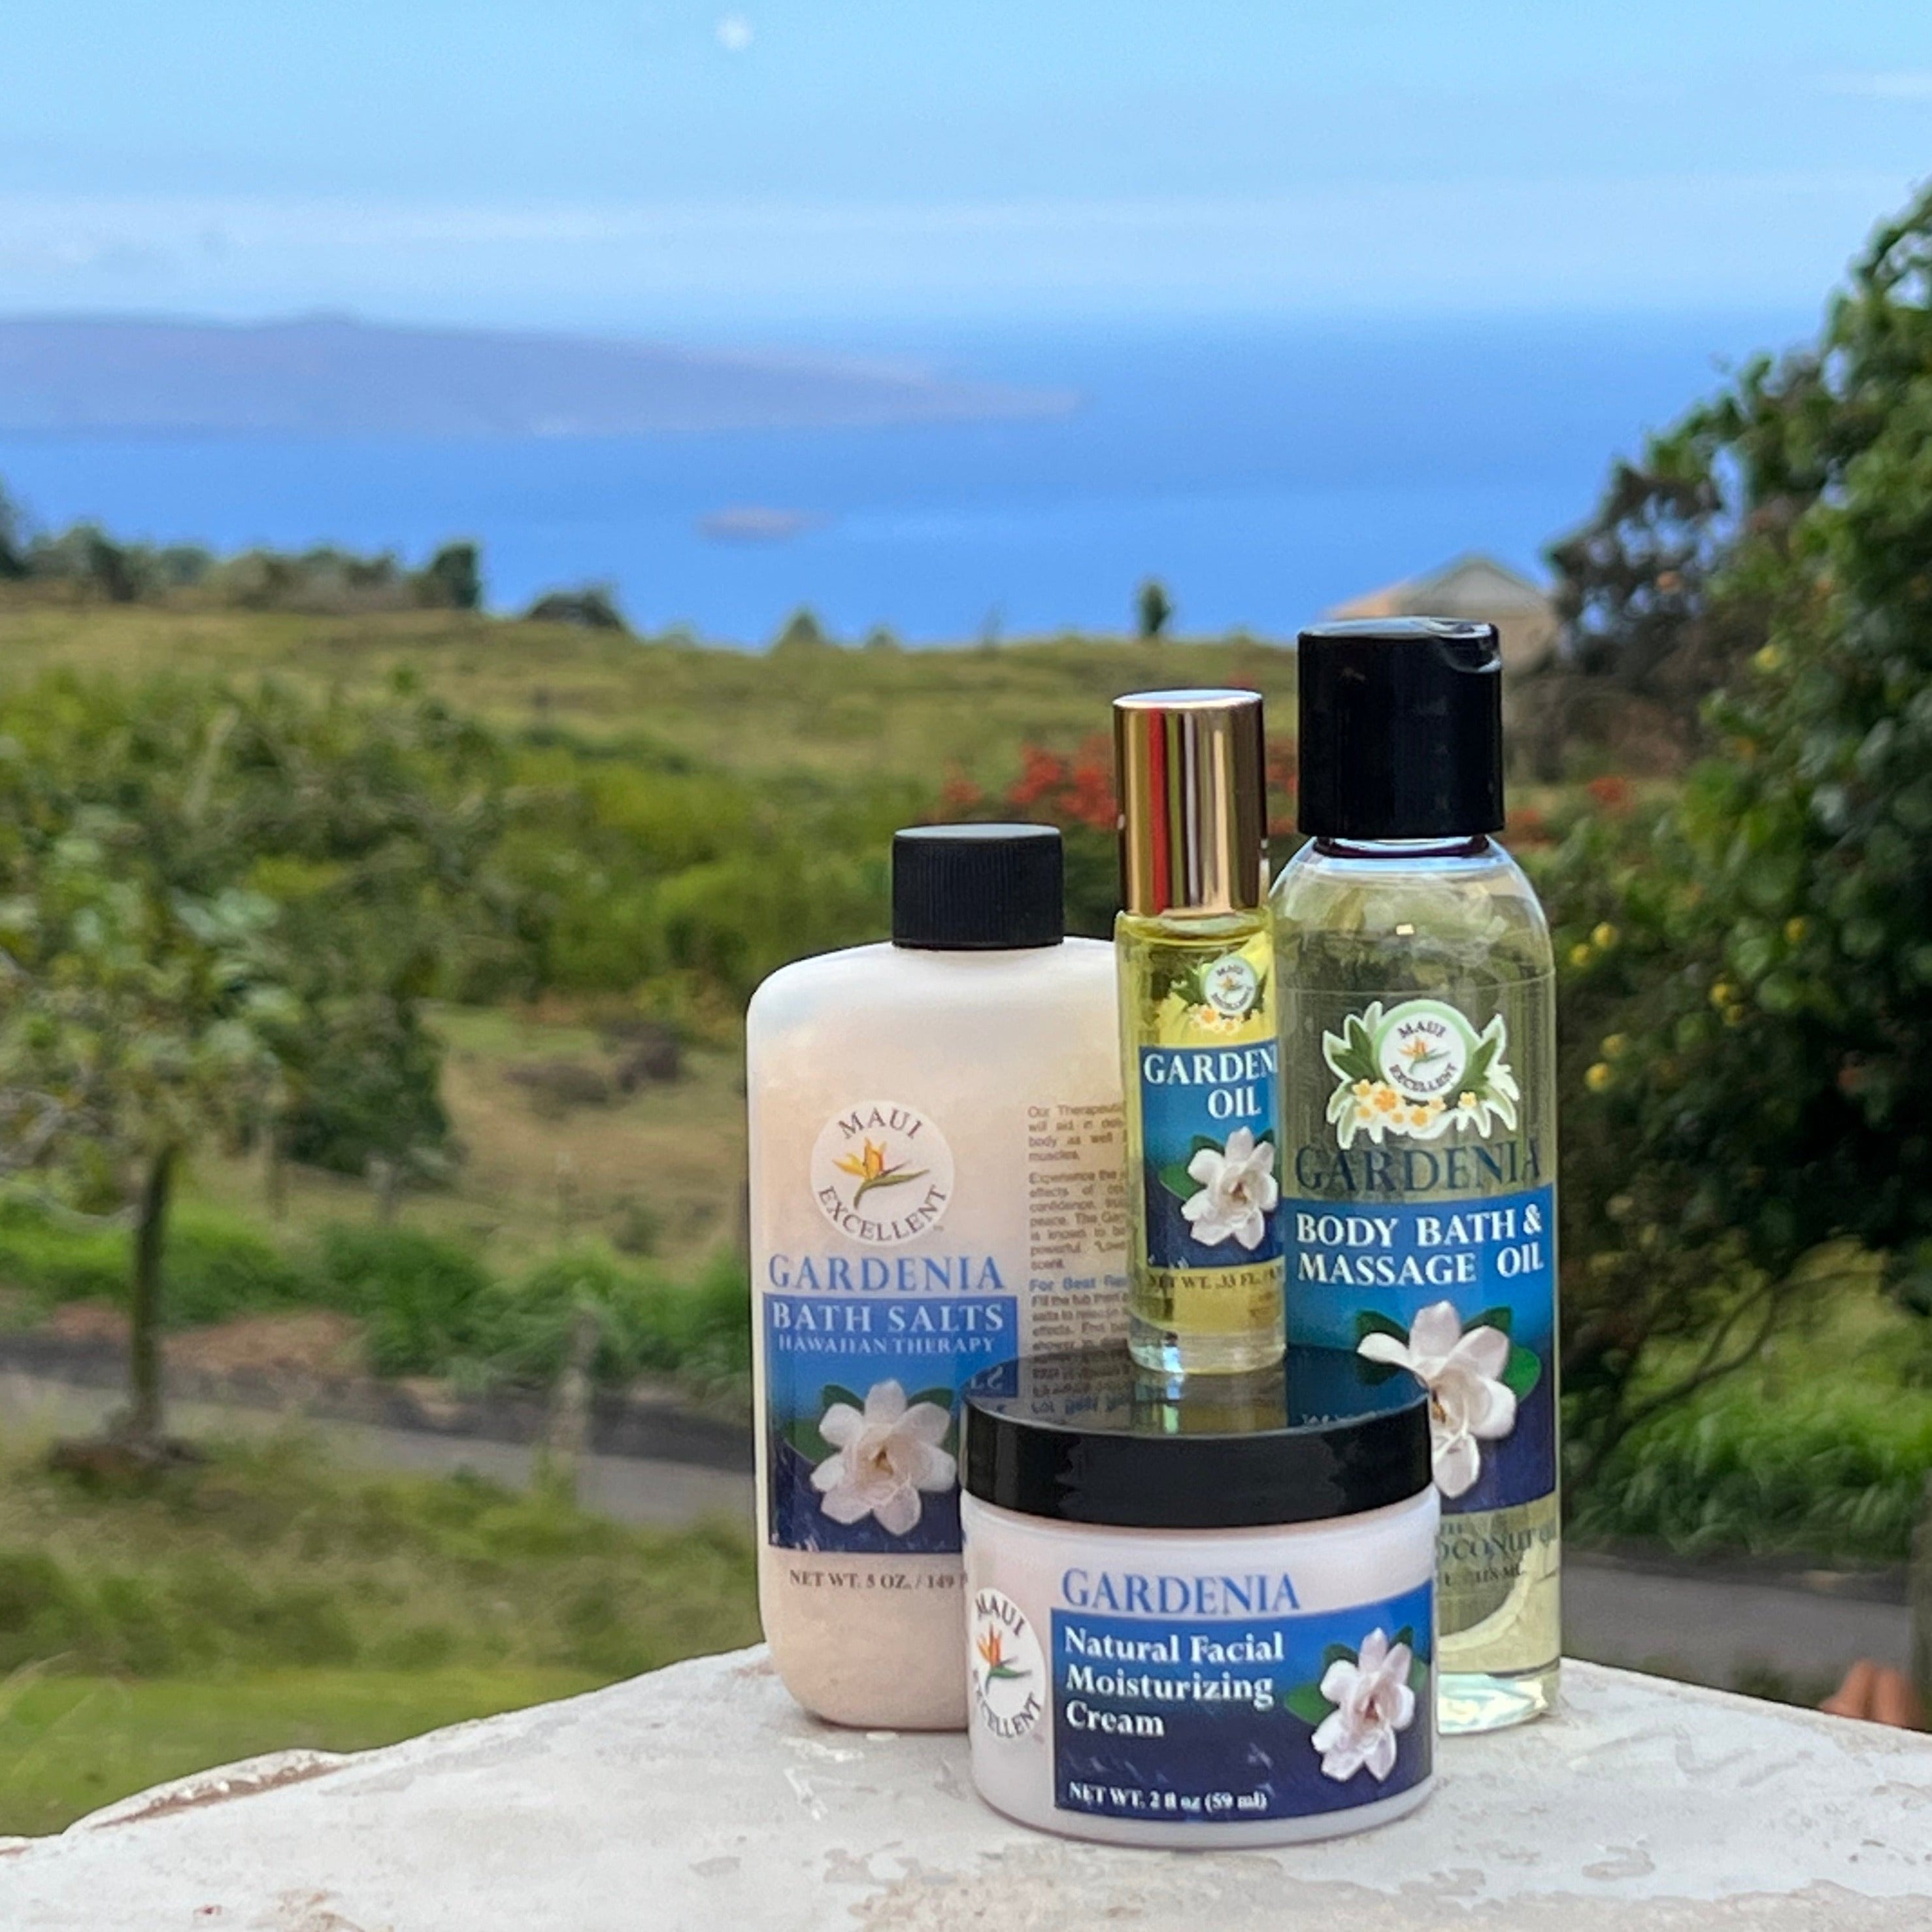 Maui Excellent Gardenia Product Collection on table: Full-sized Essential Oil Bath Salts, Roll-On Oil, Body Bath and Massage Oil, and Natural Facial Moisturizing Cream. Trees, ocean, and distant island in background. 